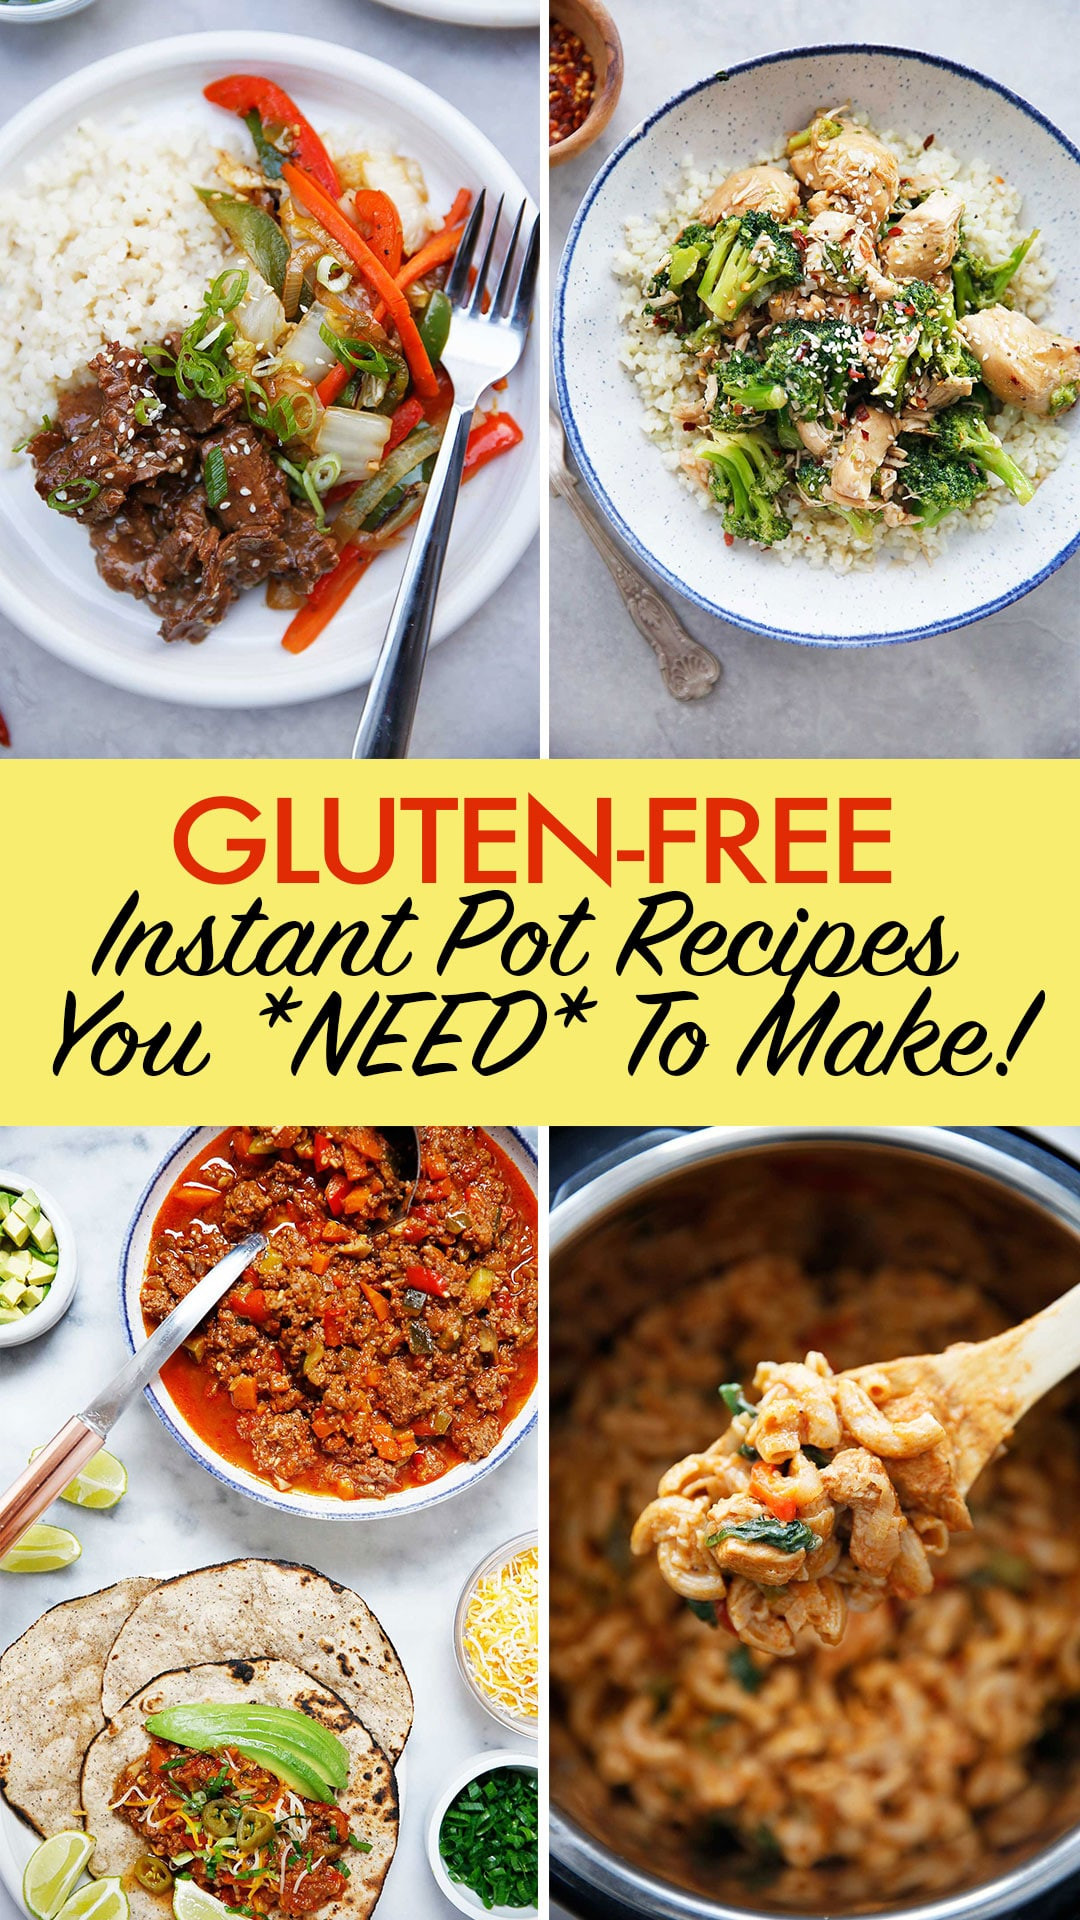 Dairy Free Instant Pot Recipes
 Instant Pot Recipes You NEED To Make Gluten Free